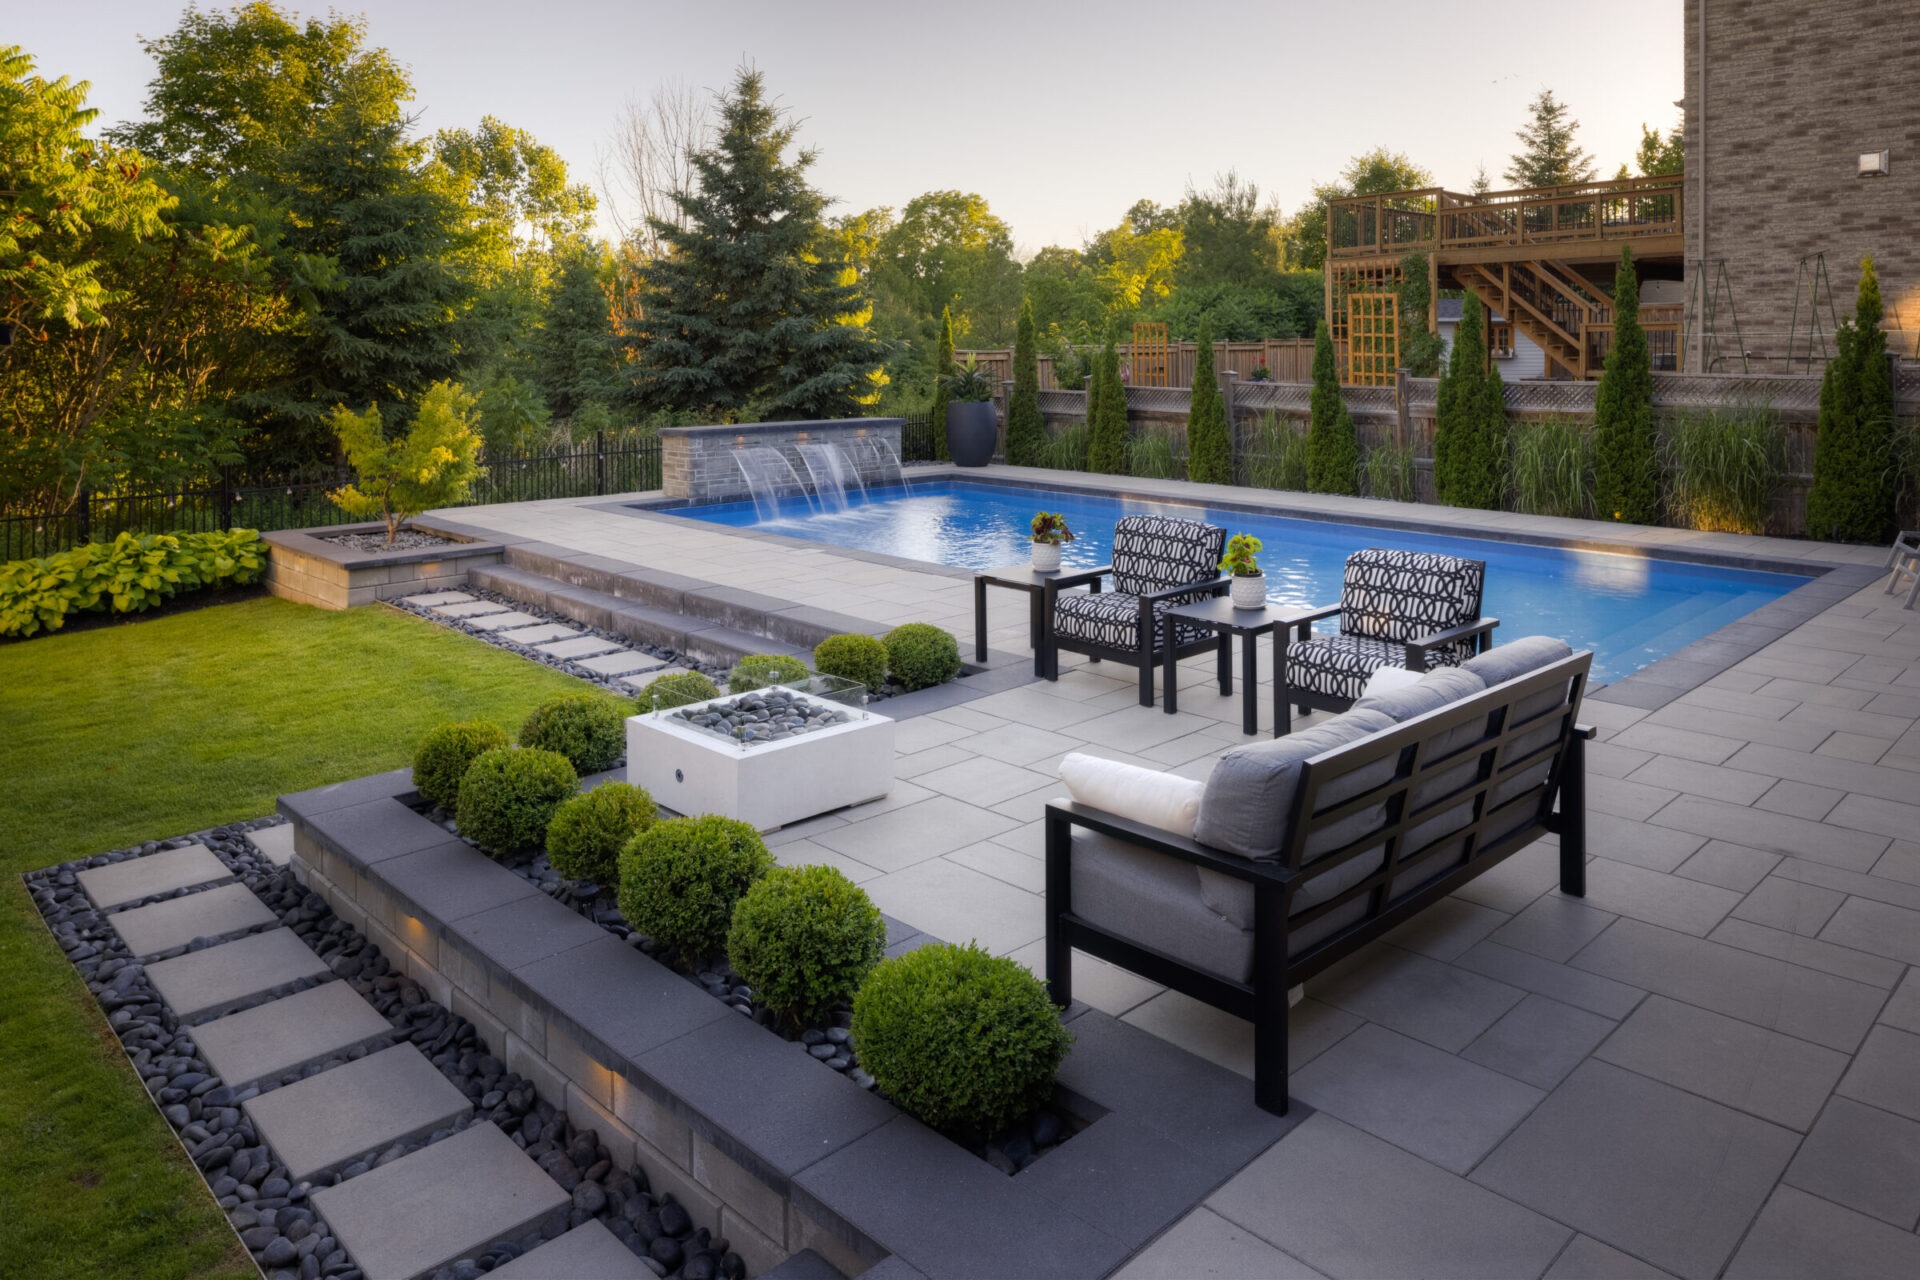 A luxurious backyard with a patio area featuring modern outdoor furniture, an in-ground pool, manicured greenery, and a tranquil water feature.